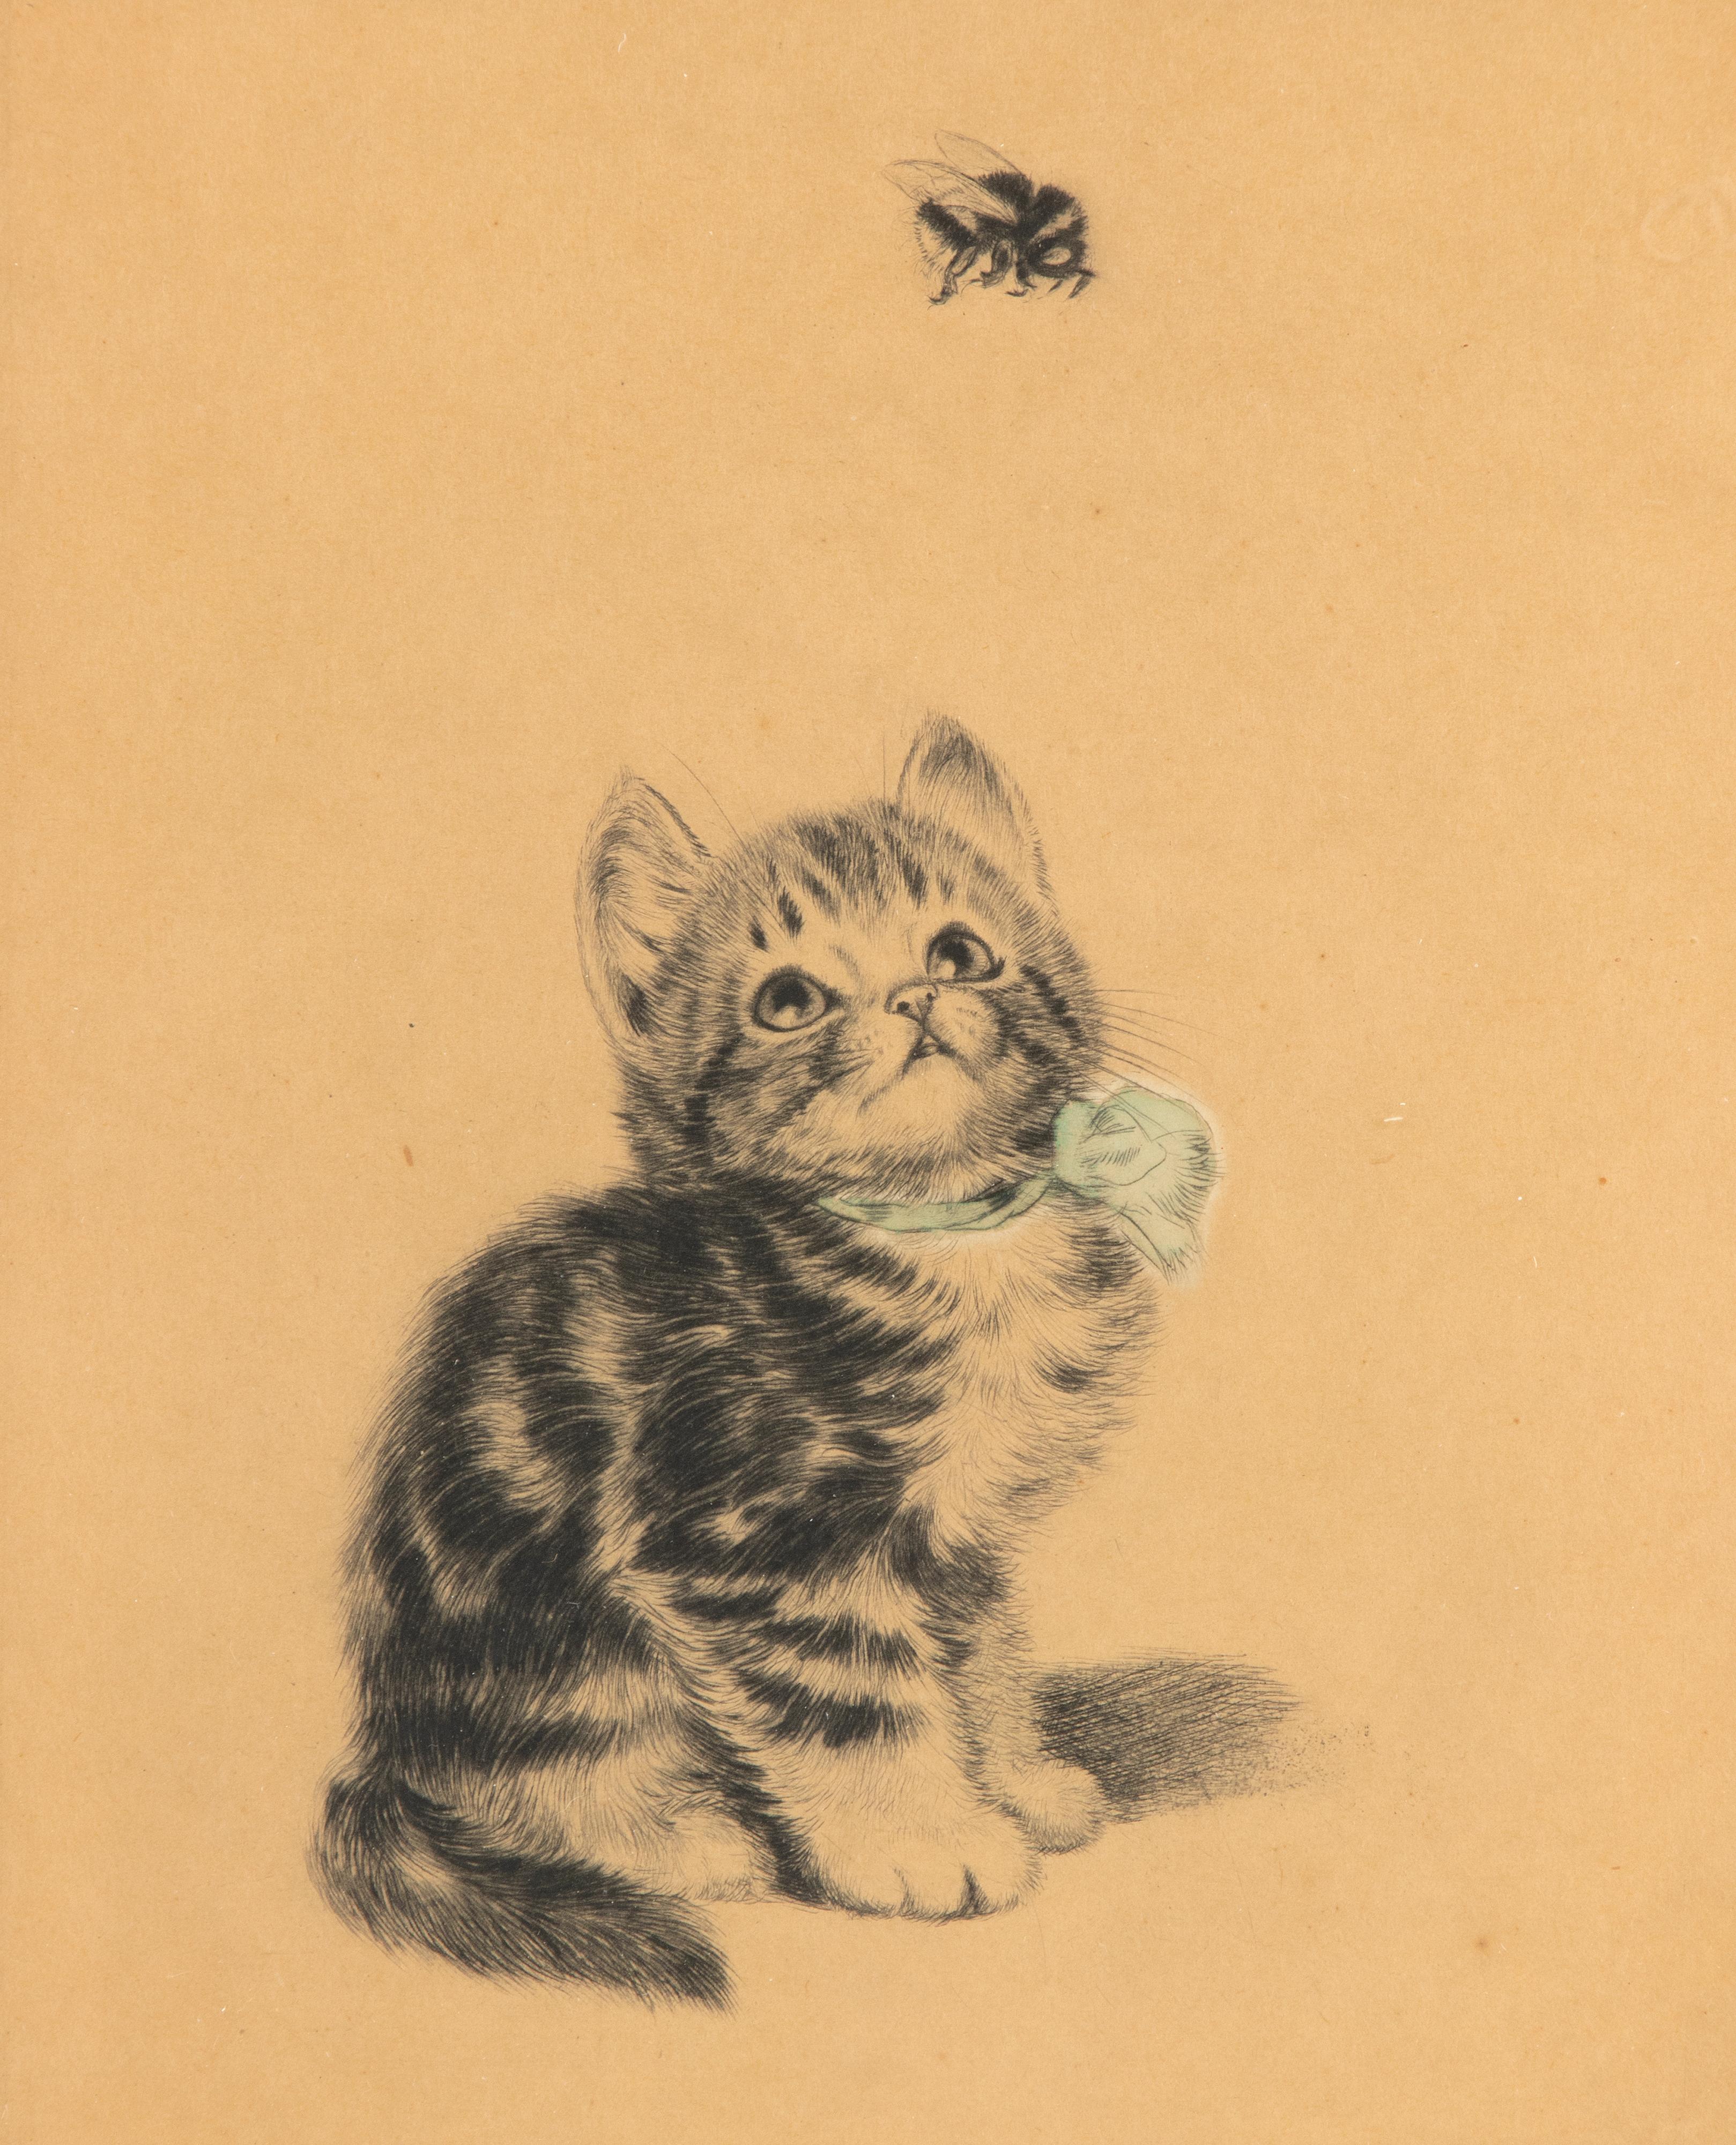 A cute lithograph of a kitten accompanied by a bee. Signed below with pencil by the artist: Meta Plückebaum. Printed on paper. With the original wooden frame.

Meta Pluckebaum (1876-1945) was a German artist and illustrator, best remembered today